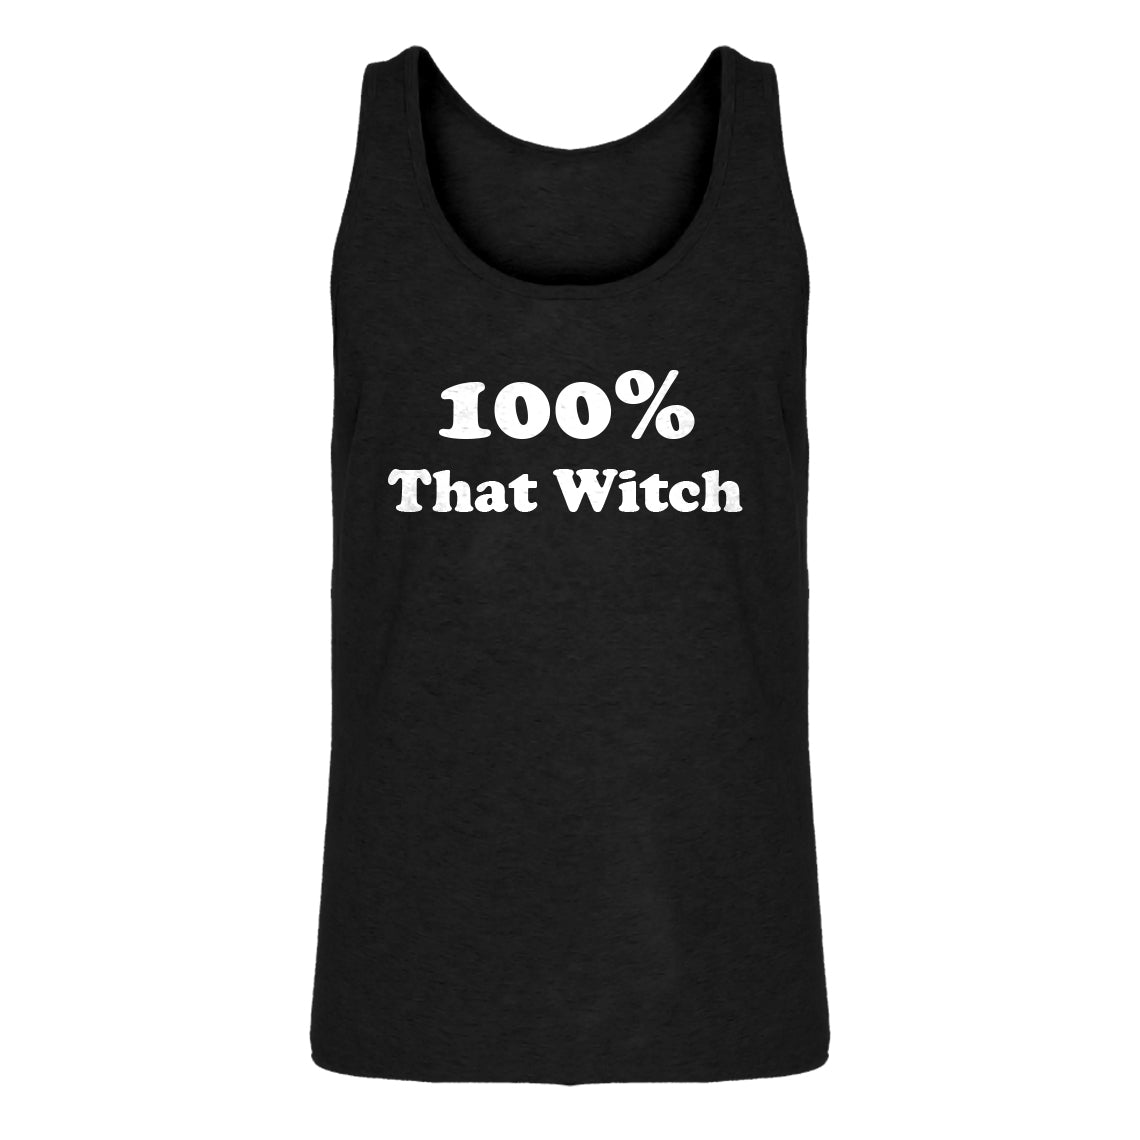 Mens 100% That Witch Jersey Tank Top